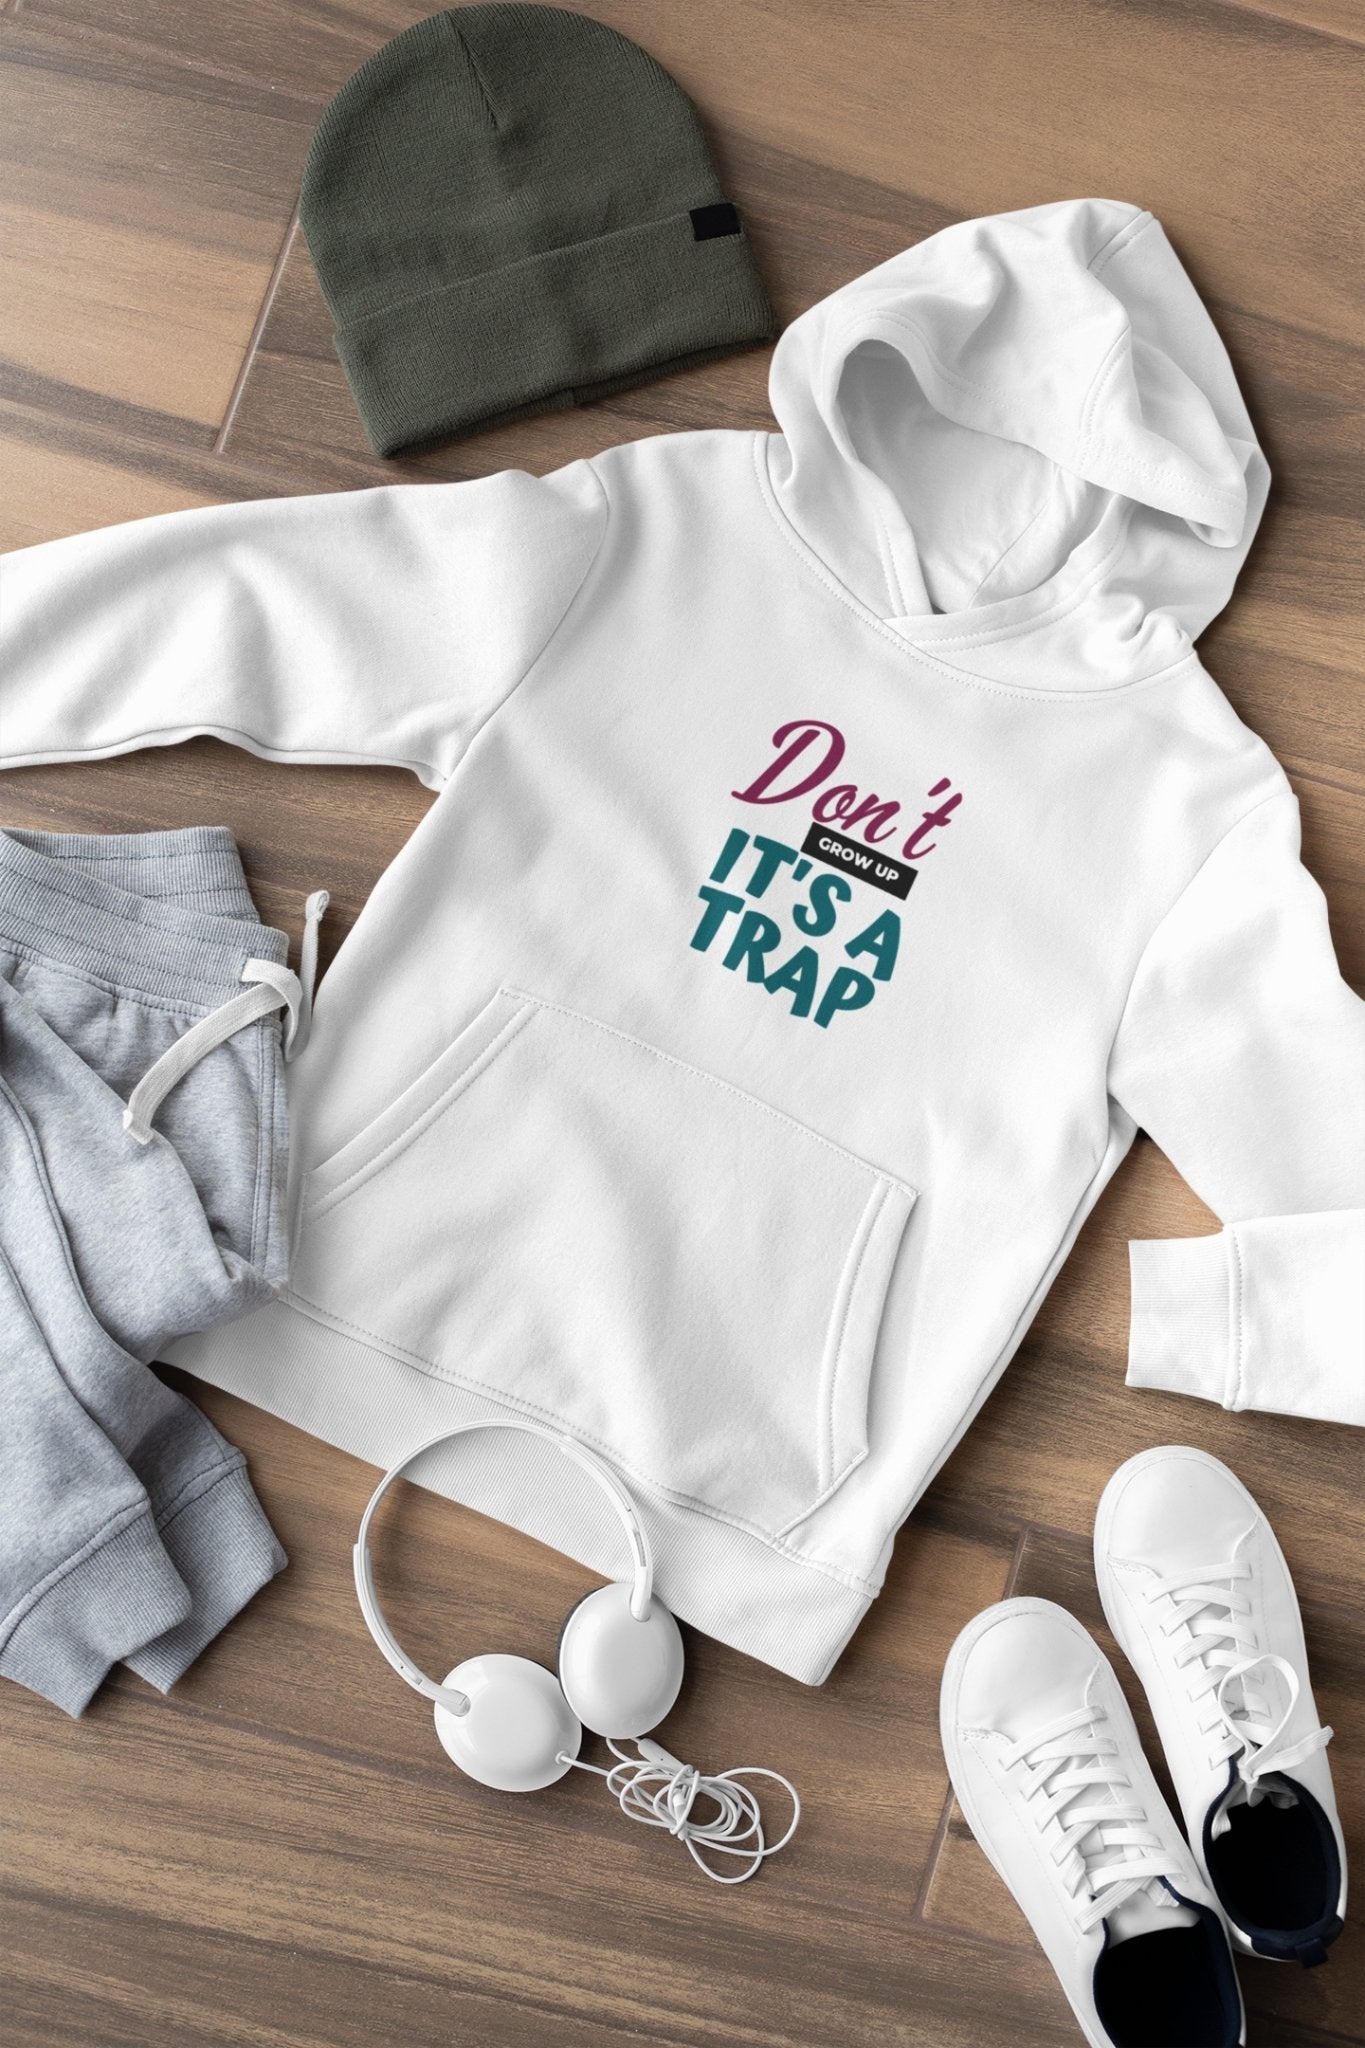 Dont Grow Up Its a Trap Typography Hoodies for Women-FunkyTradition - Funky Tees Club